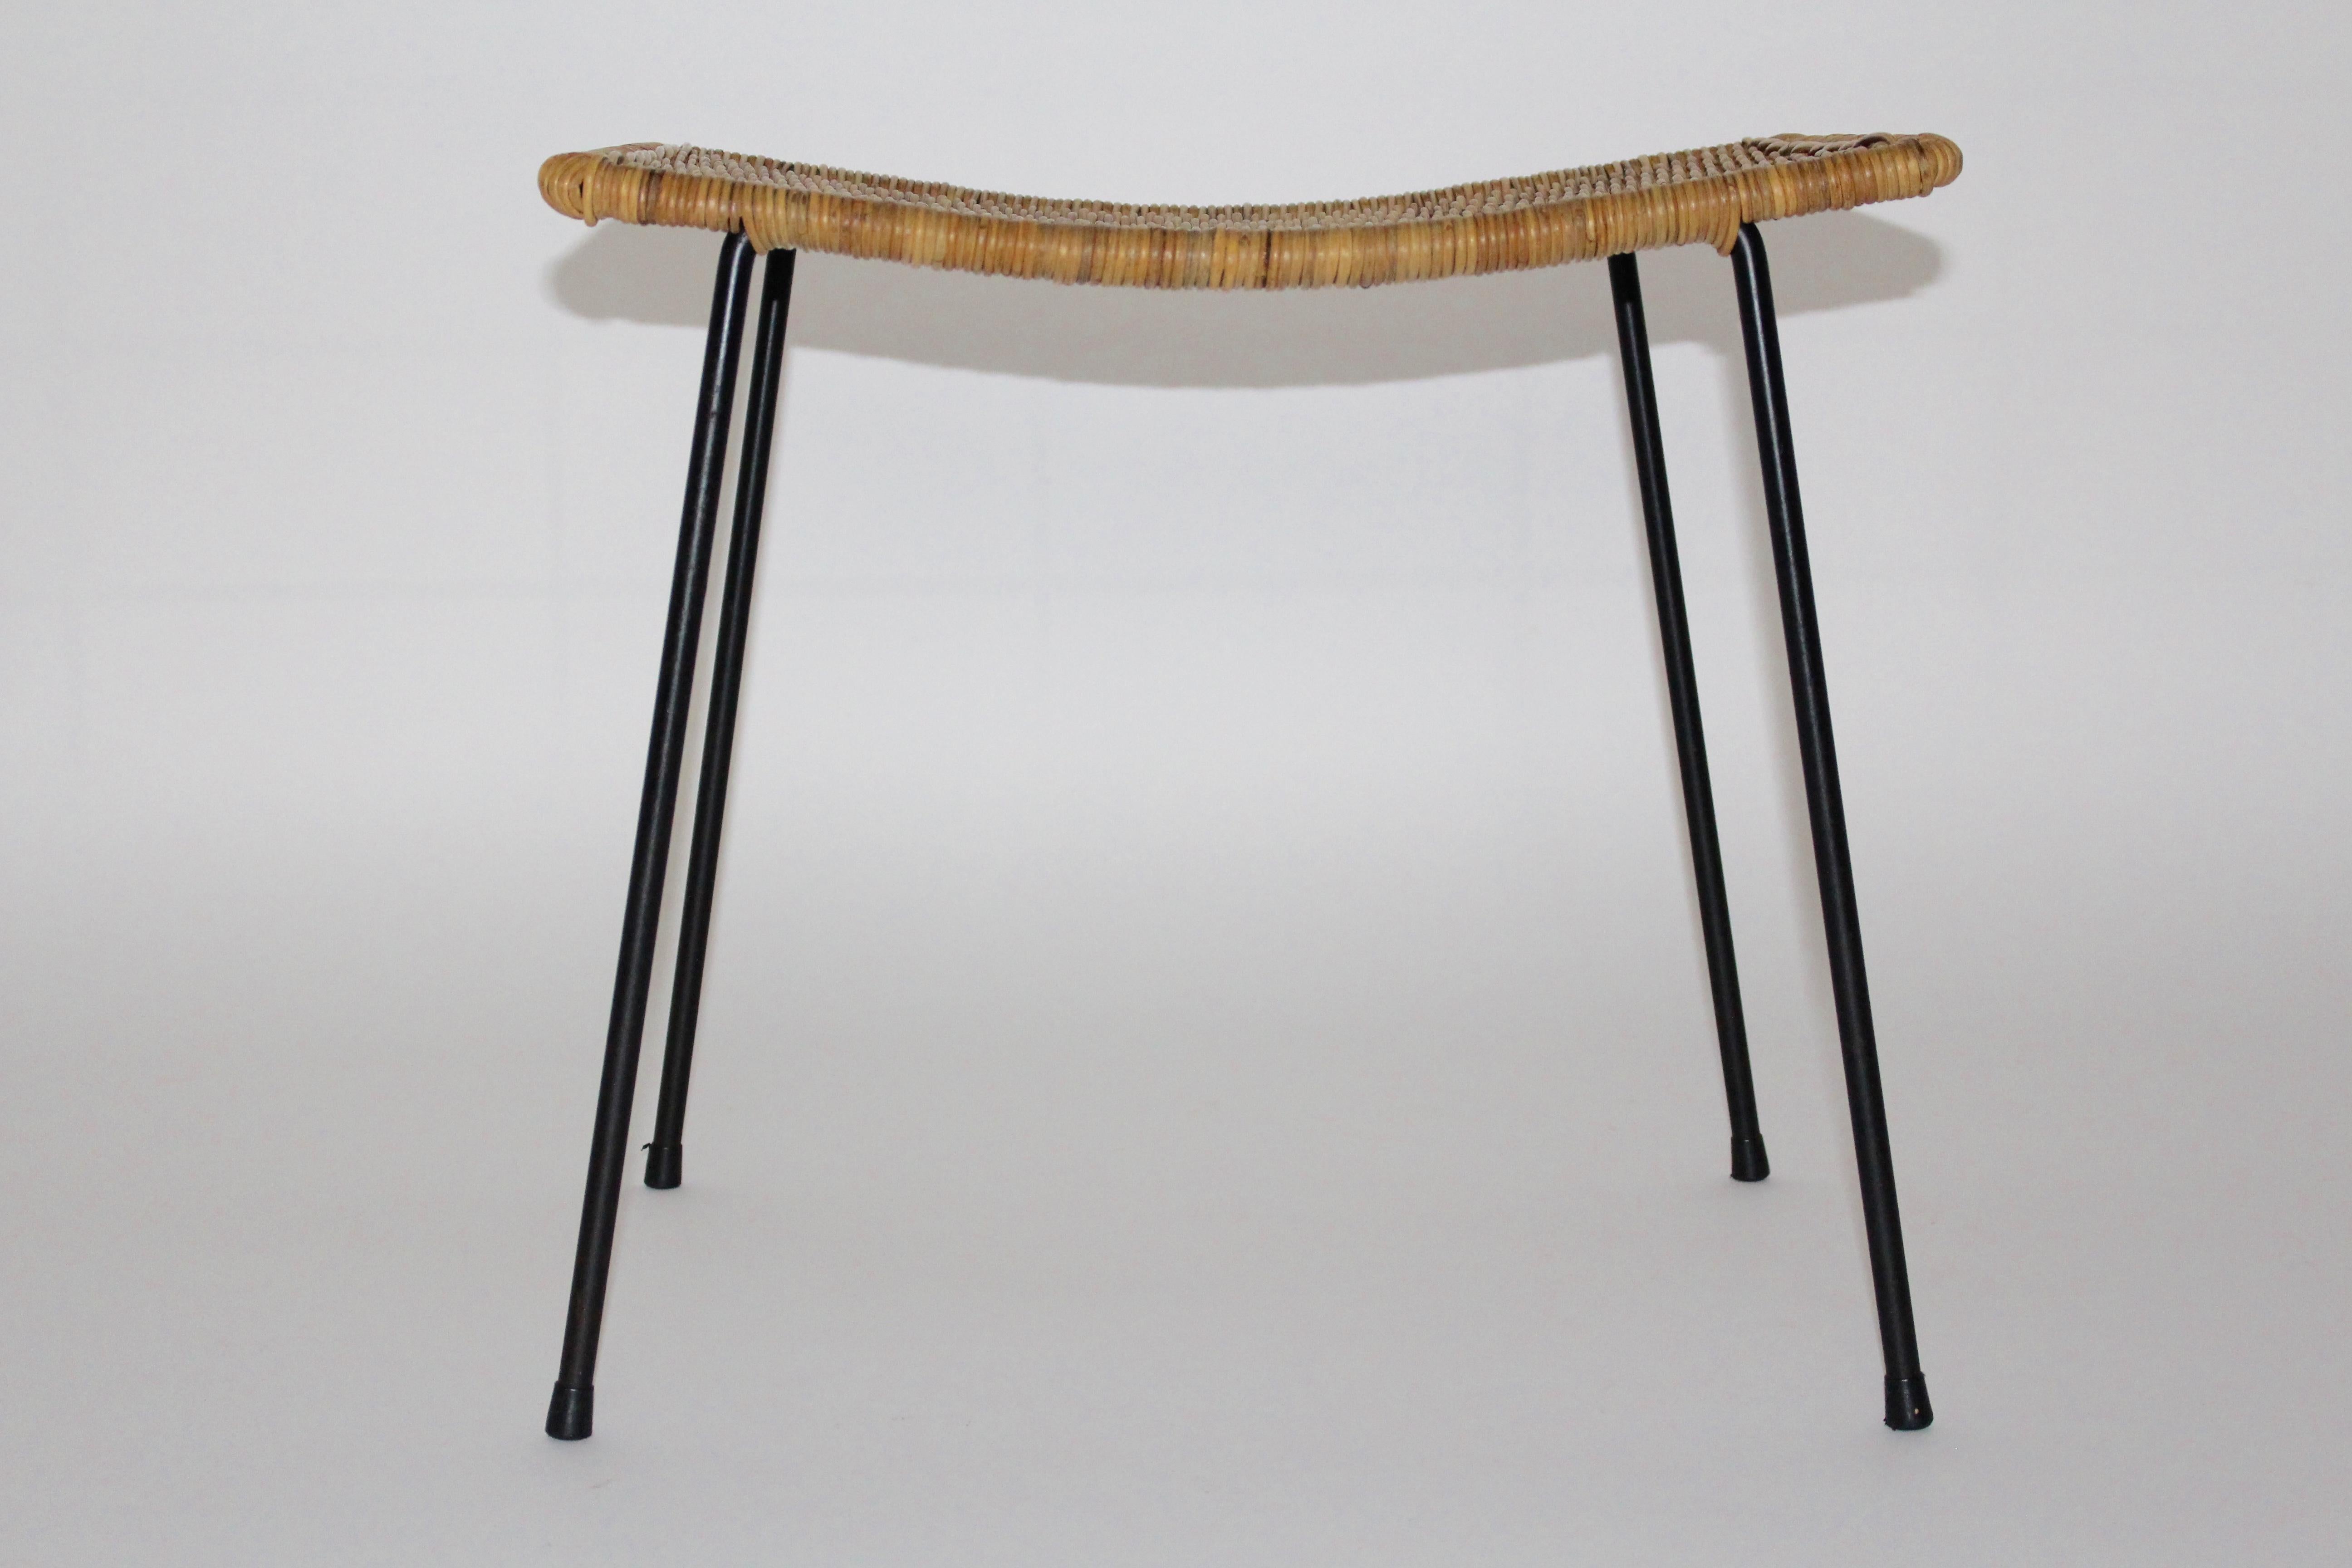 Mid-Century Modern vintage stool from woven rattan and black metal feet designed and manufactured Vienna 1950s.
A stunning and comfortable lightweight stool from woven rattan with four black lacquered metal feet with a slightly curved seat.
This